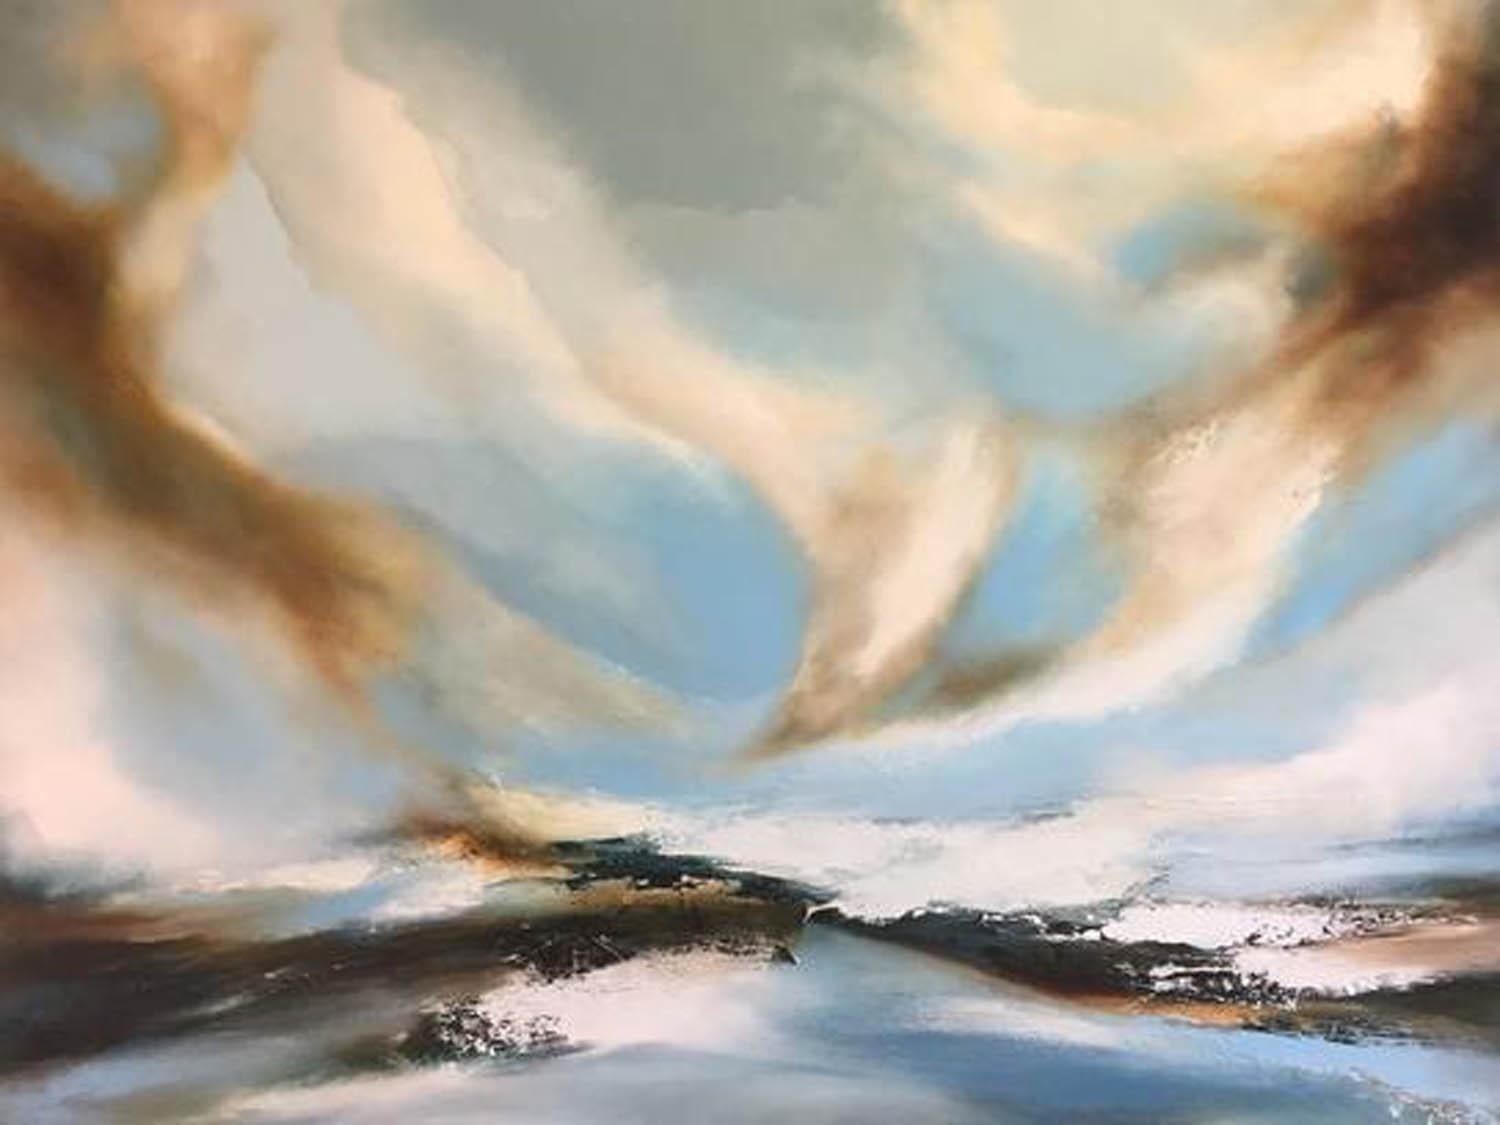 Winter’s Breath is an Original Oil Seascape Painting, by Helen Langfield.
It is signed Helen on the front, and Helen Langfield on the back of the painting. 
It is painted on a boxed canvas, with painted sides in a block colour, and is ready to